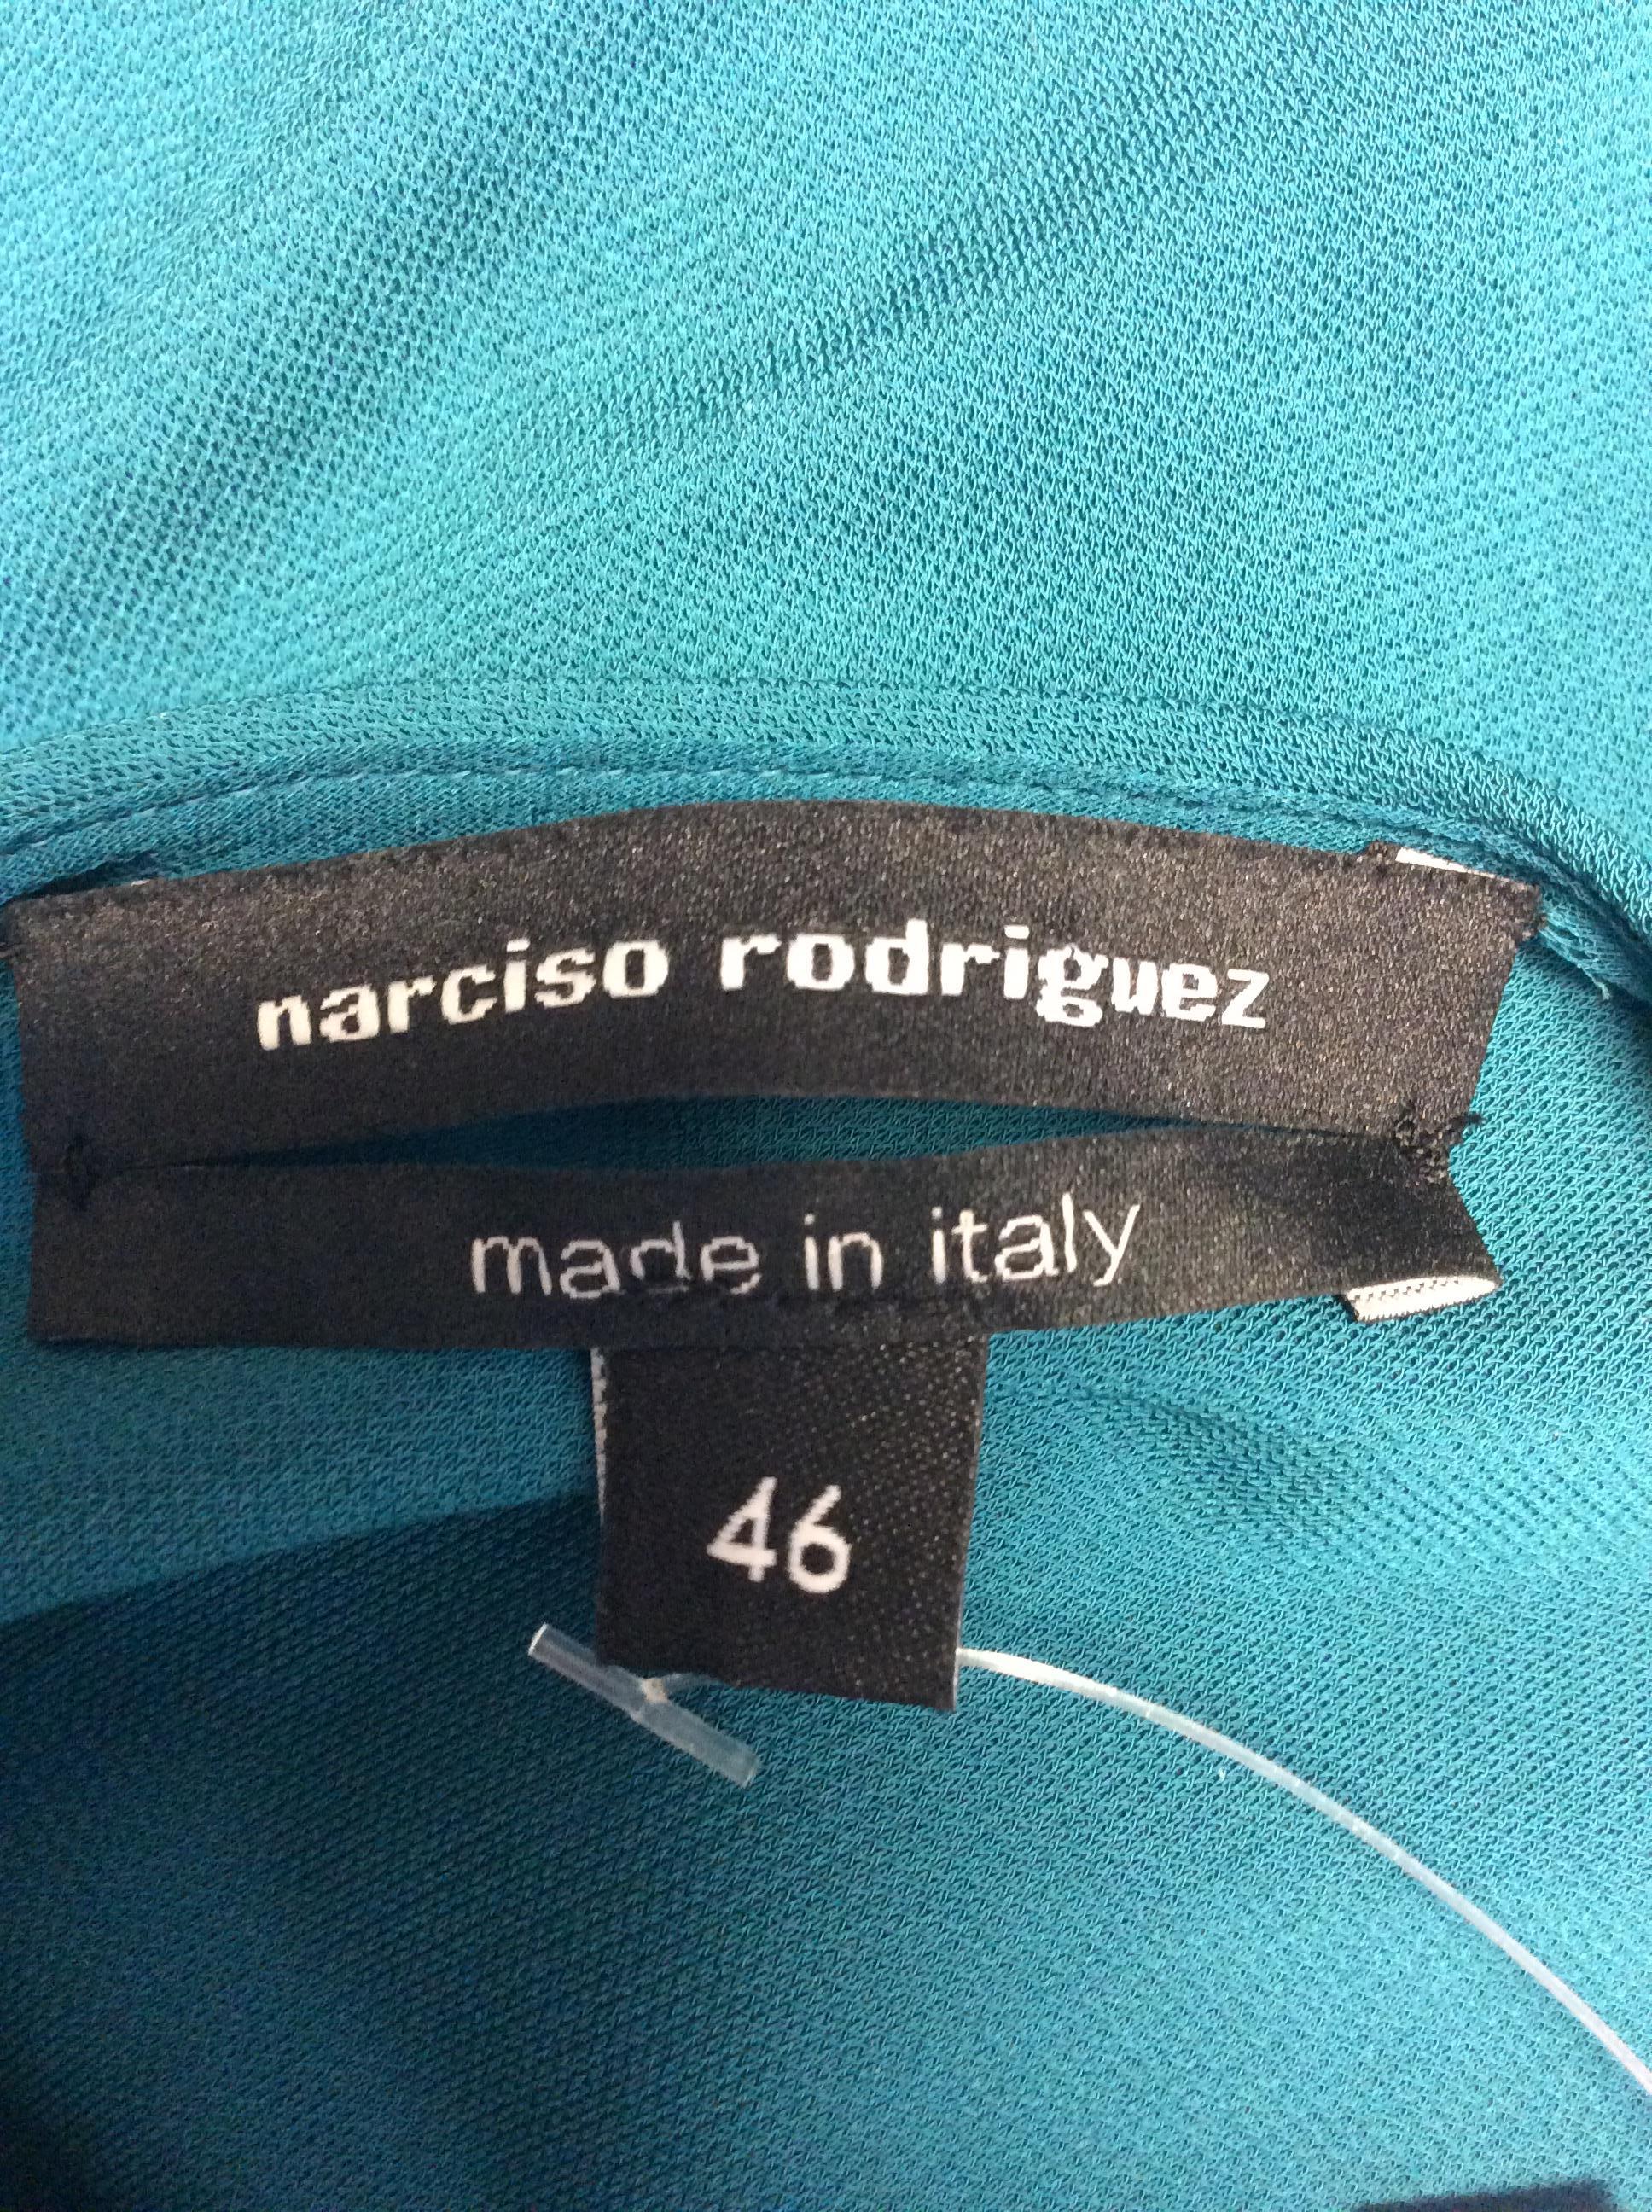 Narciso Rodriguez Teal Dress For Sale 2